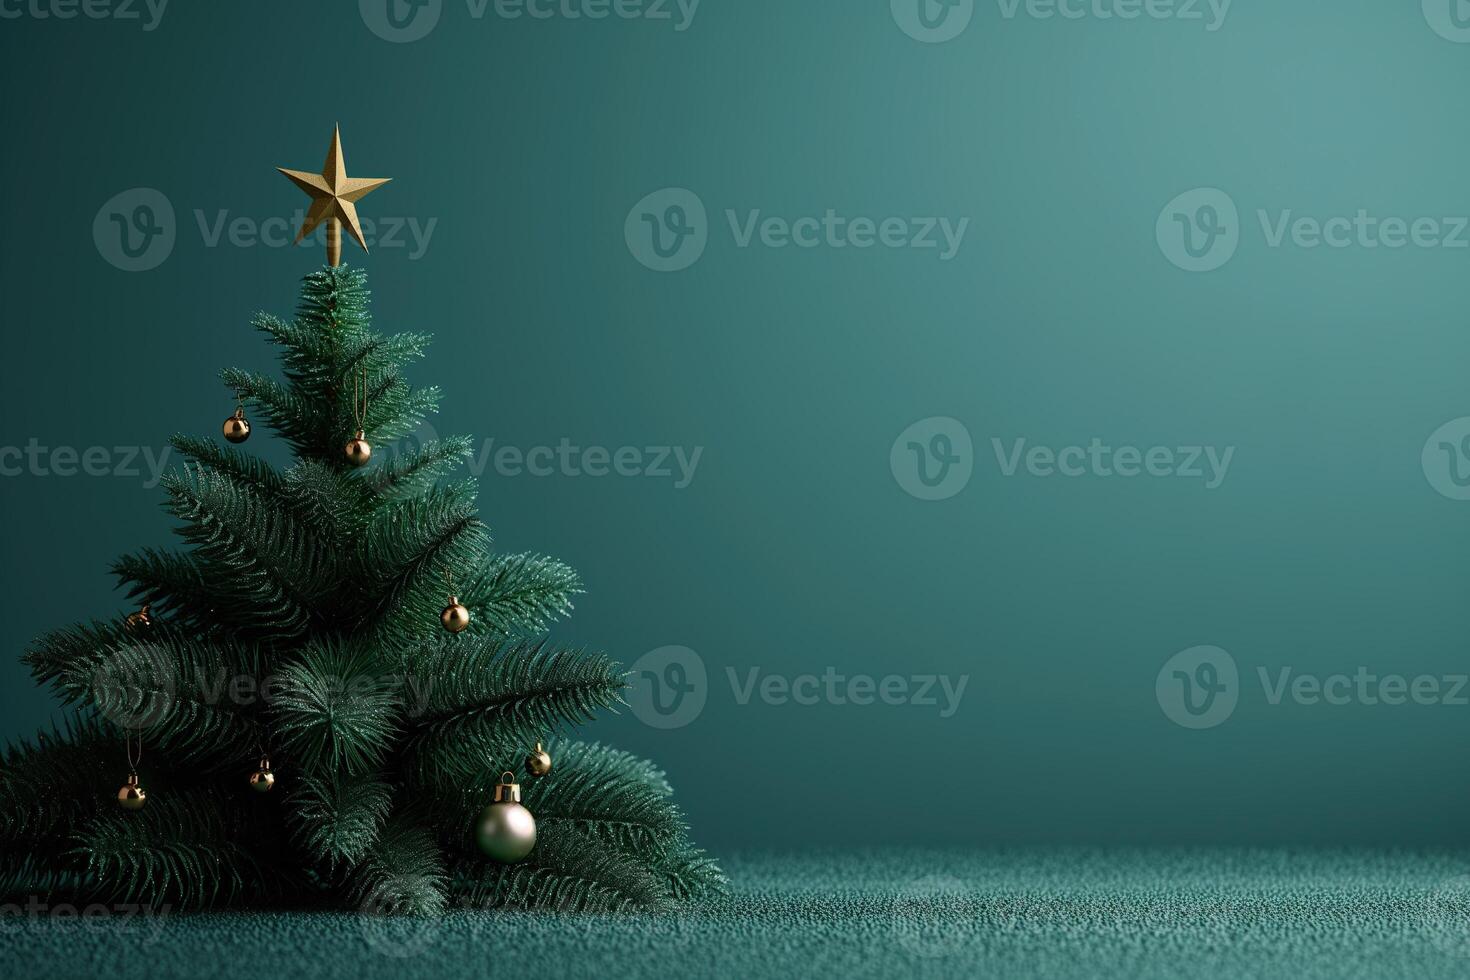 A Christmas tree with a gold star on top stands in front of a green wall, empty space, background photo